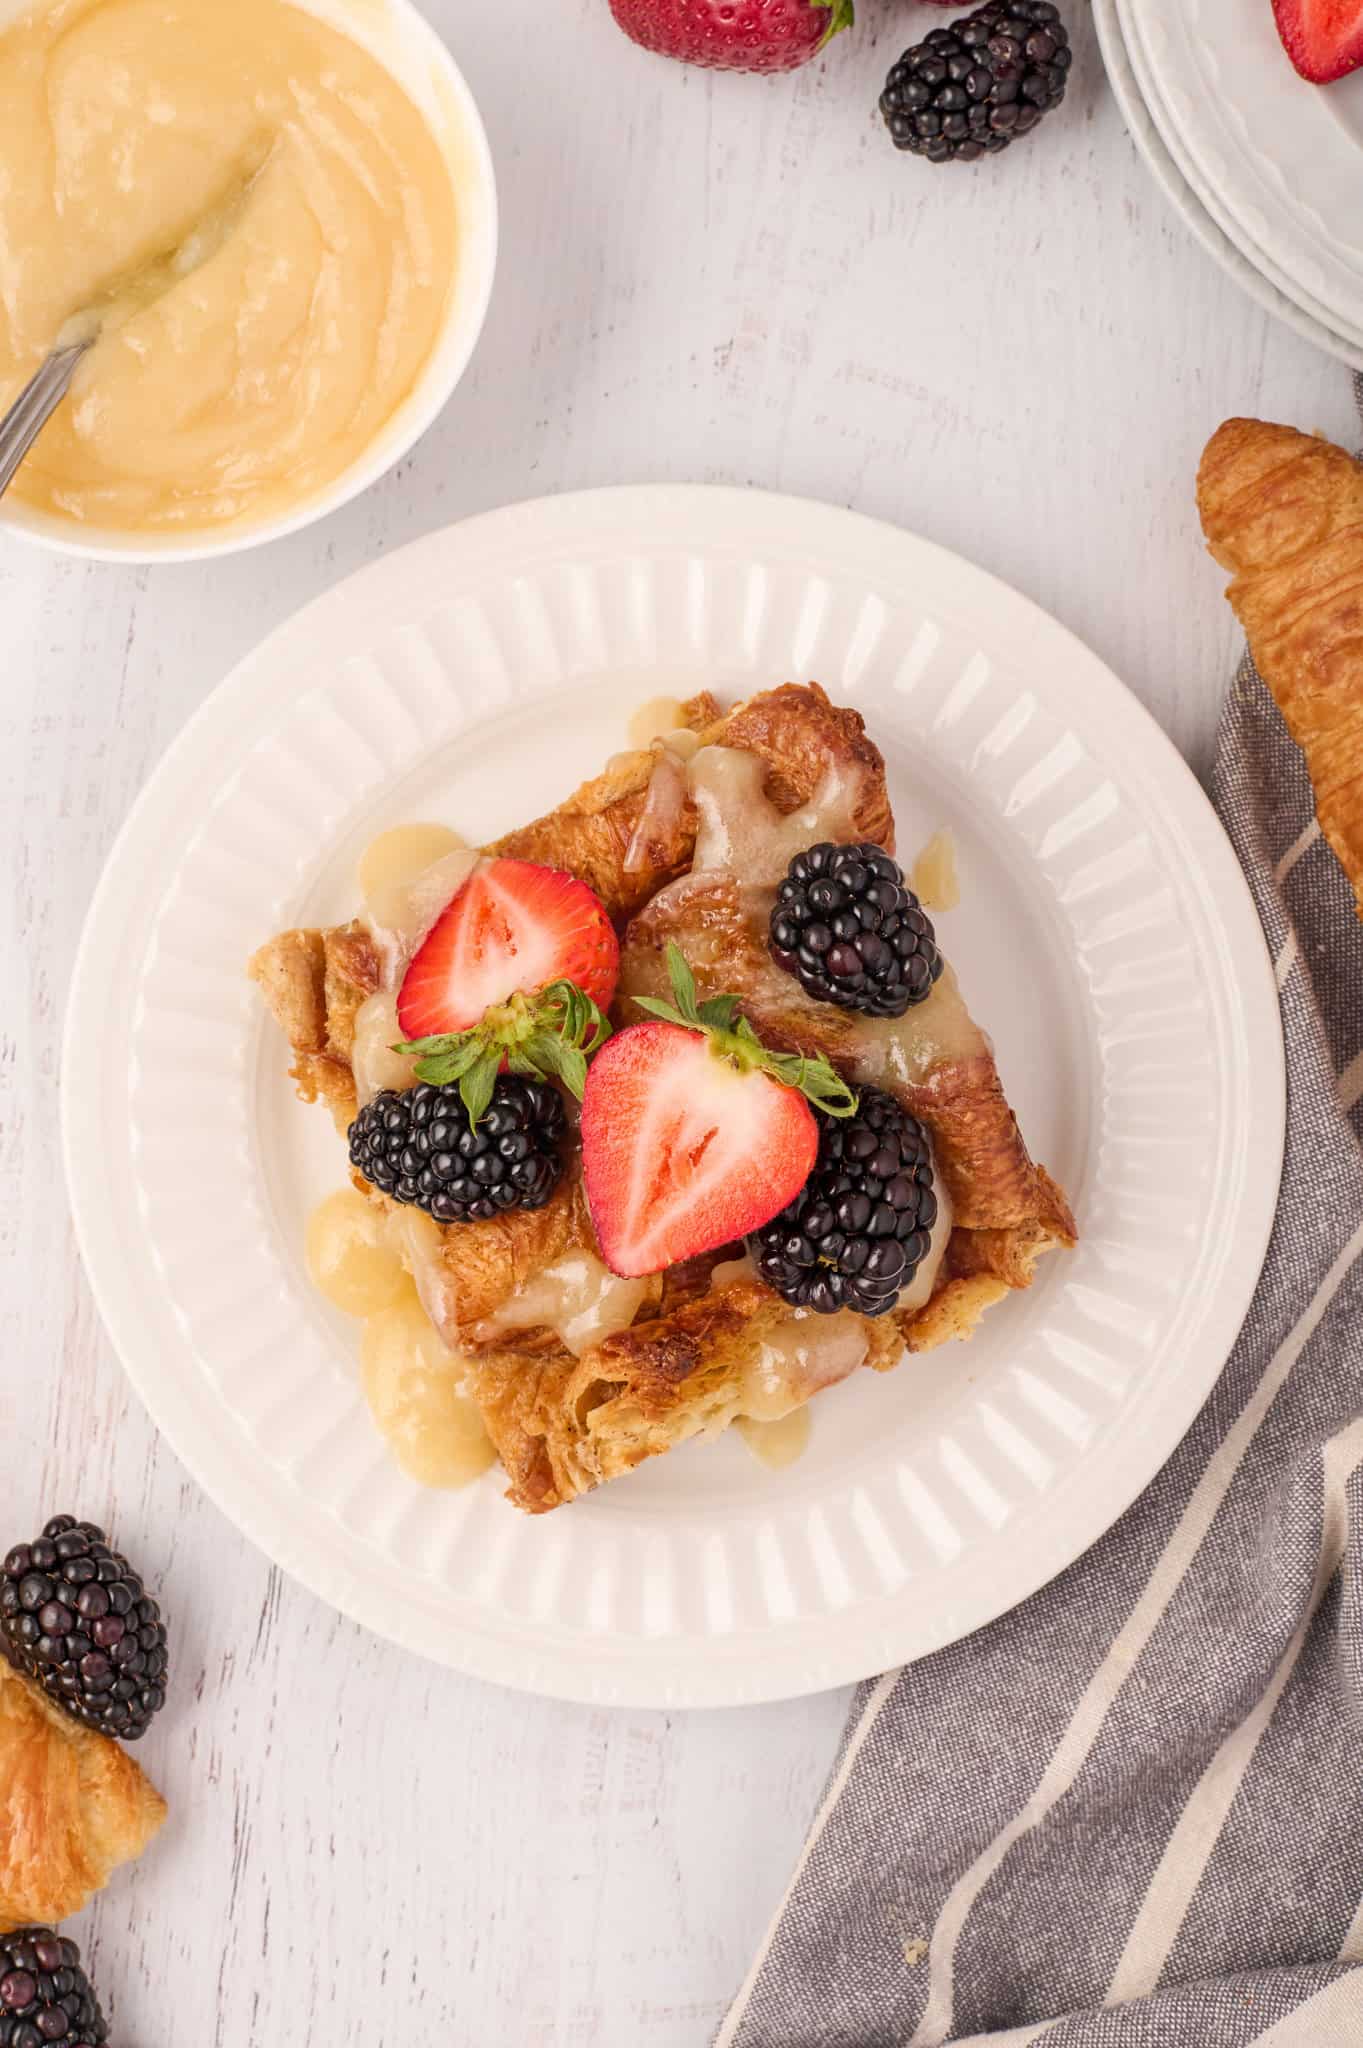 Croissant Bread Pudding is a sweet breakfast treat made with chopped butter croissants baked in an egg custard mixture and topped with a sweet vanilla sauce.